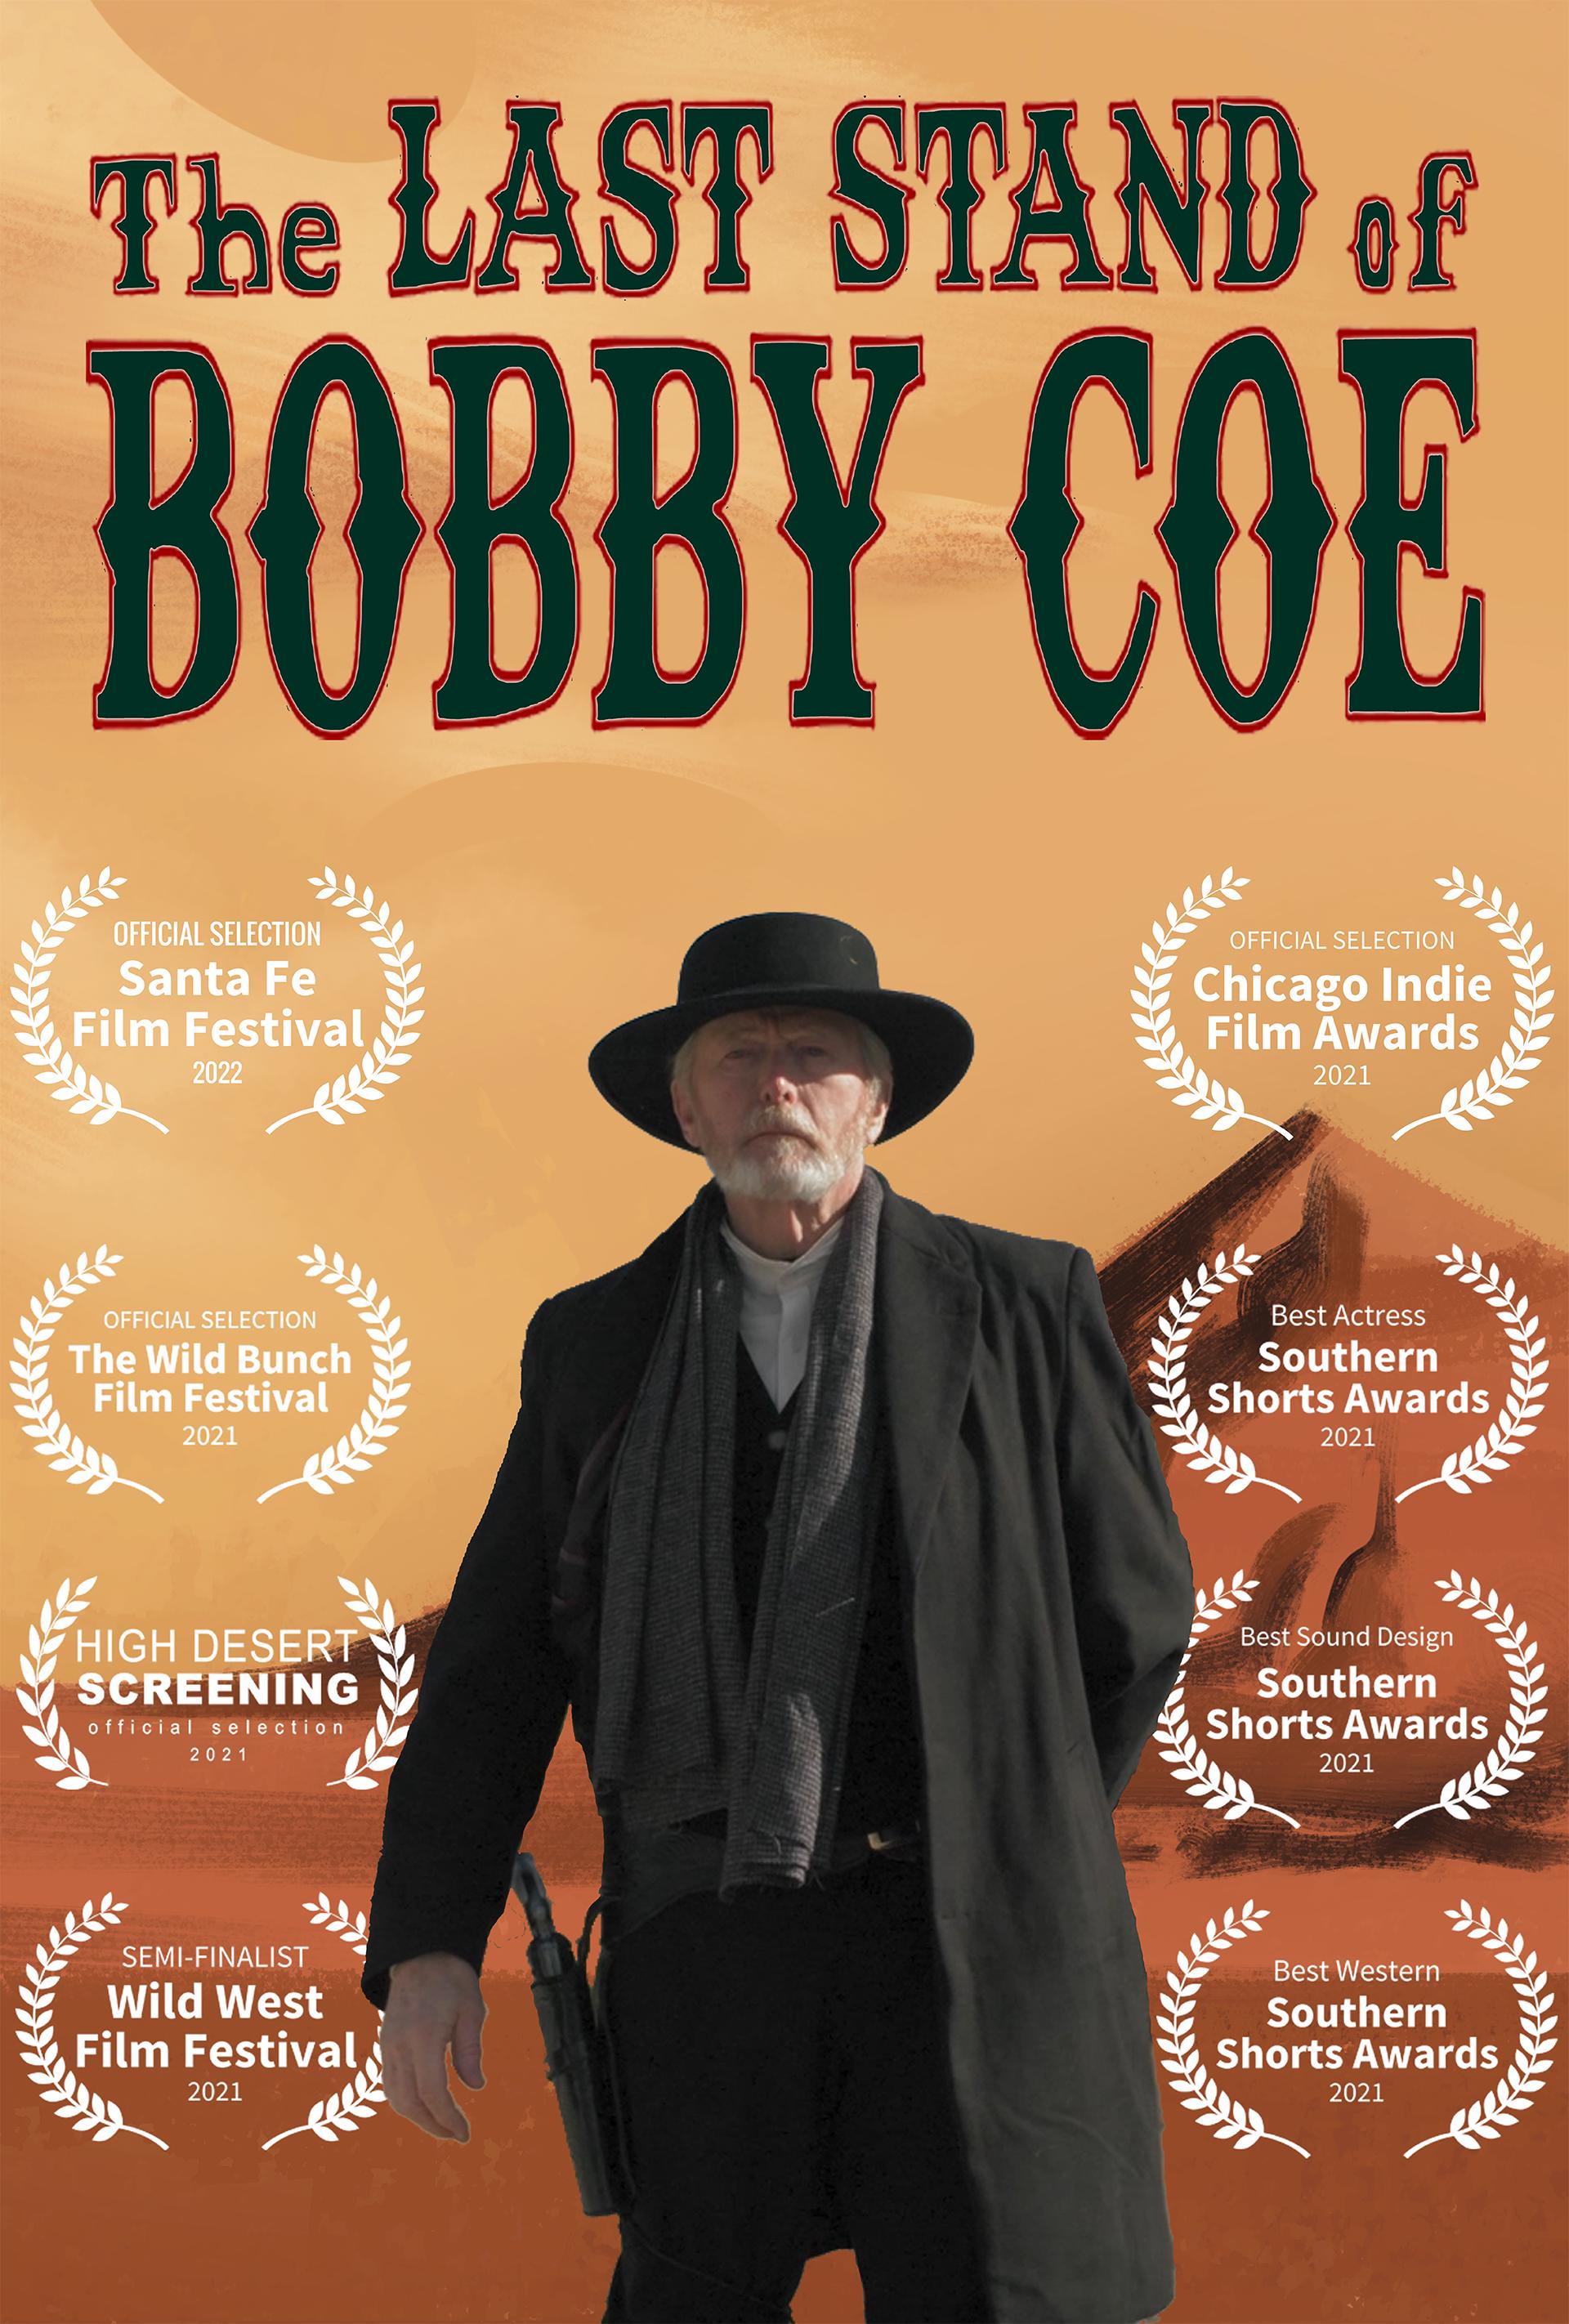 The Last Stand of Bobby Coe